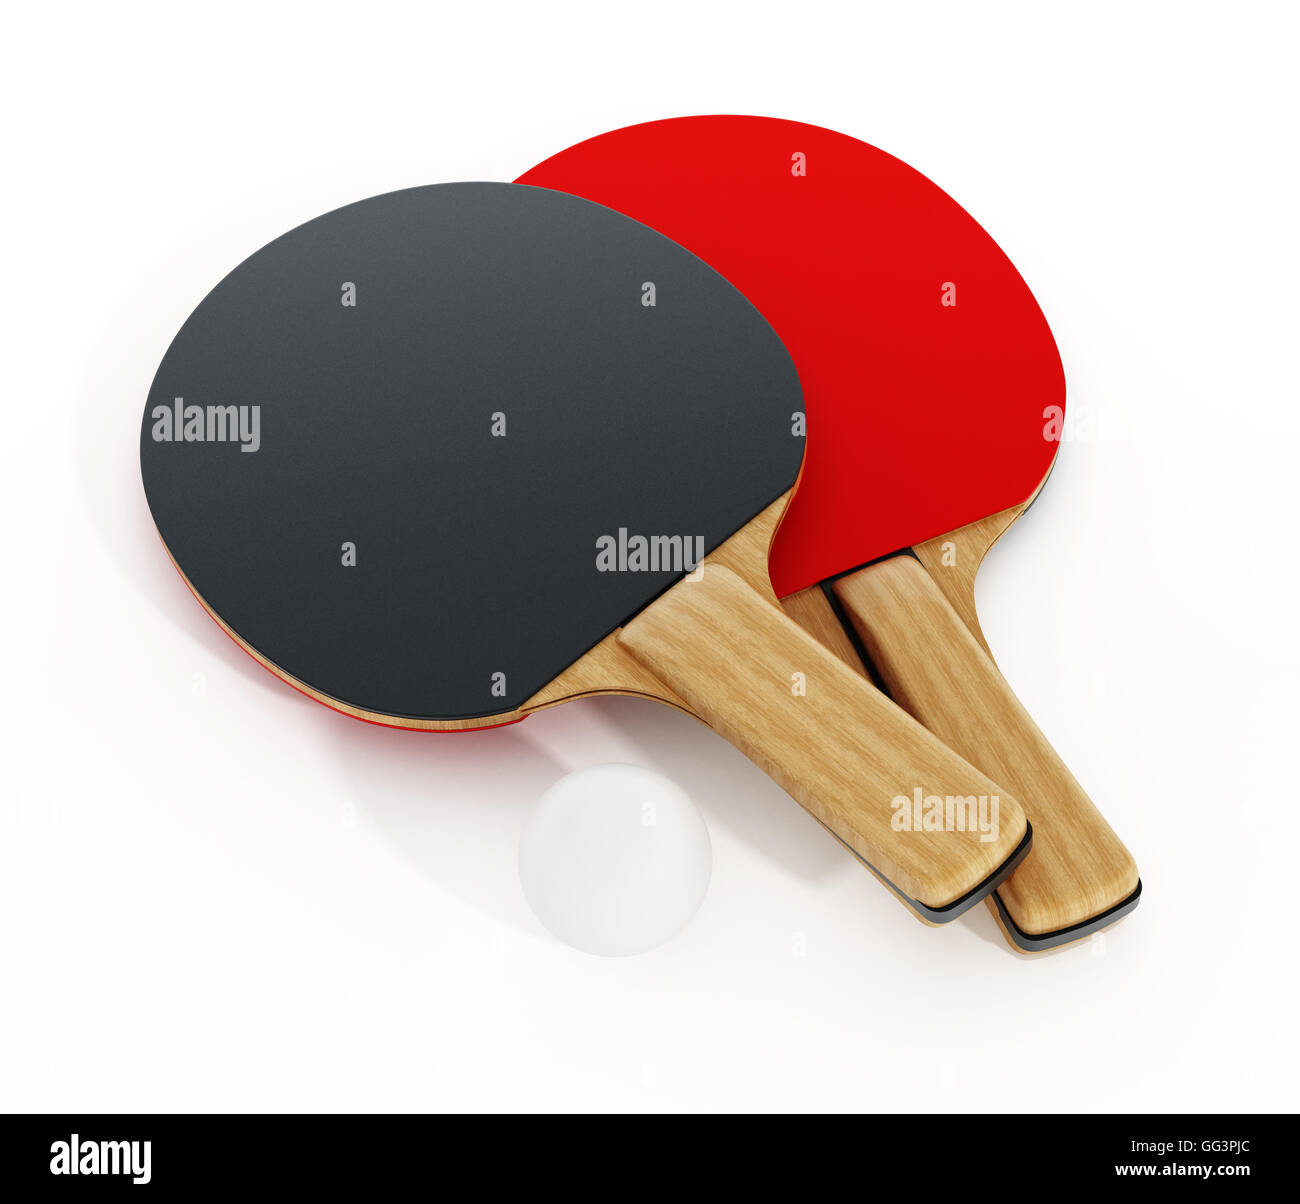 Ping pong or table tennis rackets isolated on white background. 3D illustration. Stock Photo